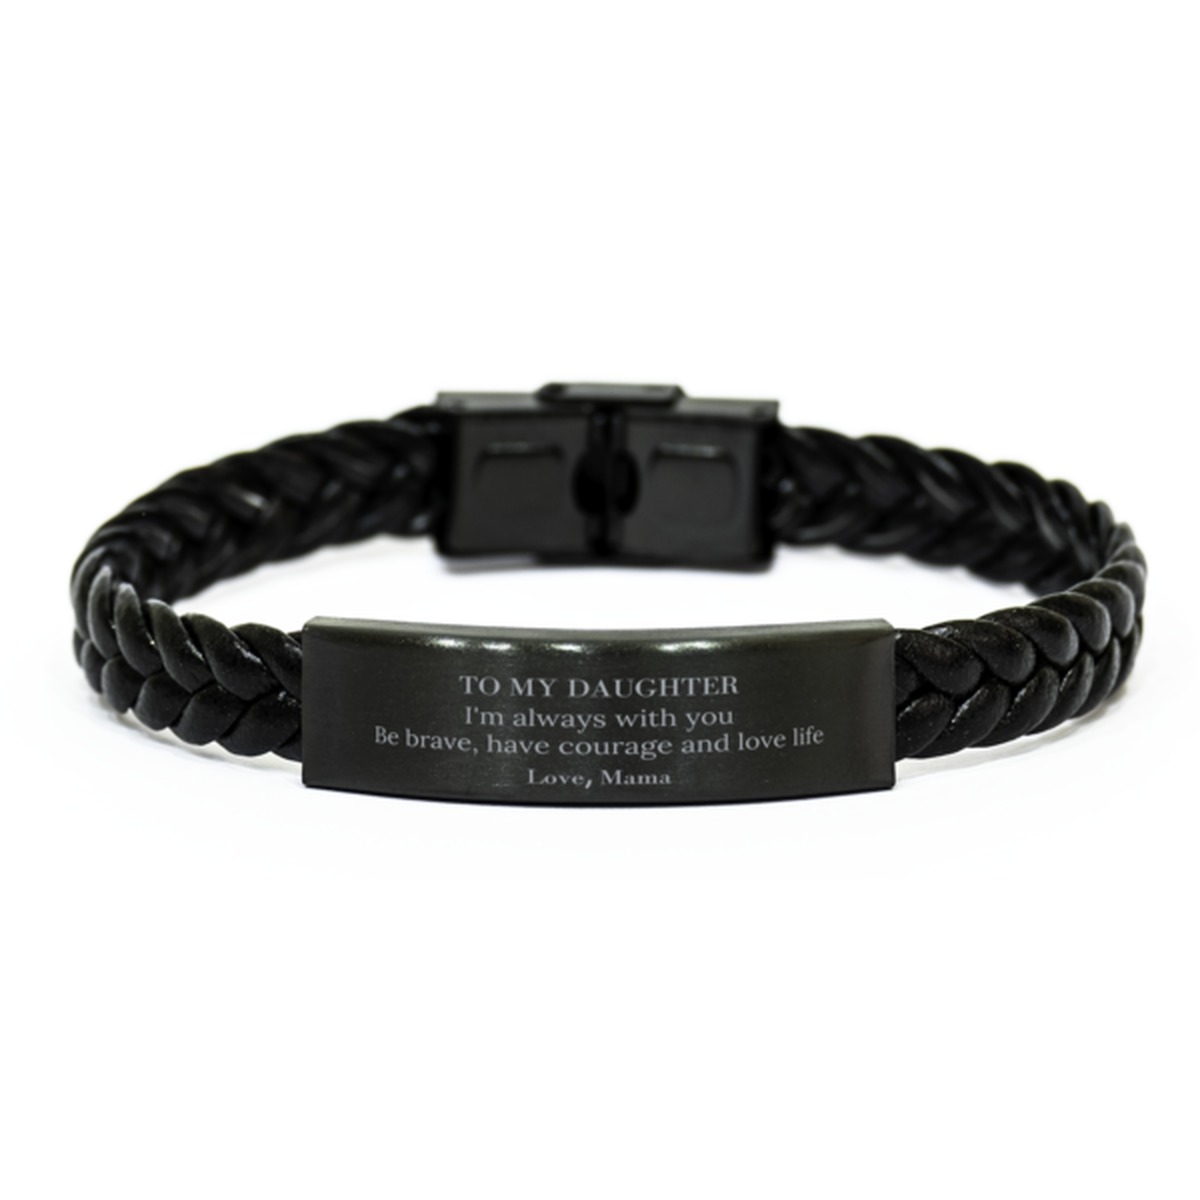 To My Daughter Gifts from Mama, Unique Braided Leather Bracelet Inspirational Christmas Birthday Graduation Gifts for Daughter I'm always with you. Be brave, have courage and love life. Love, Mama